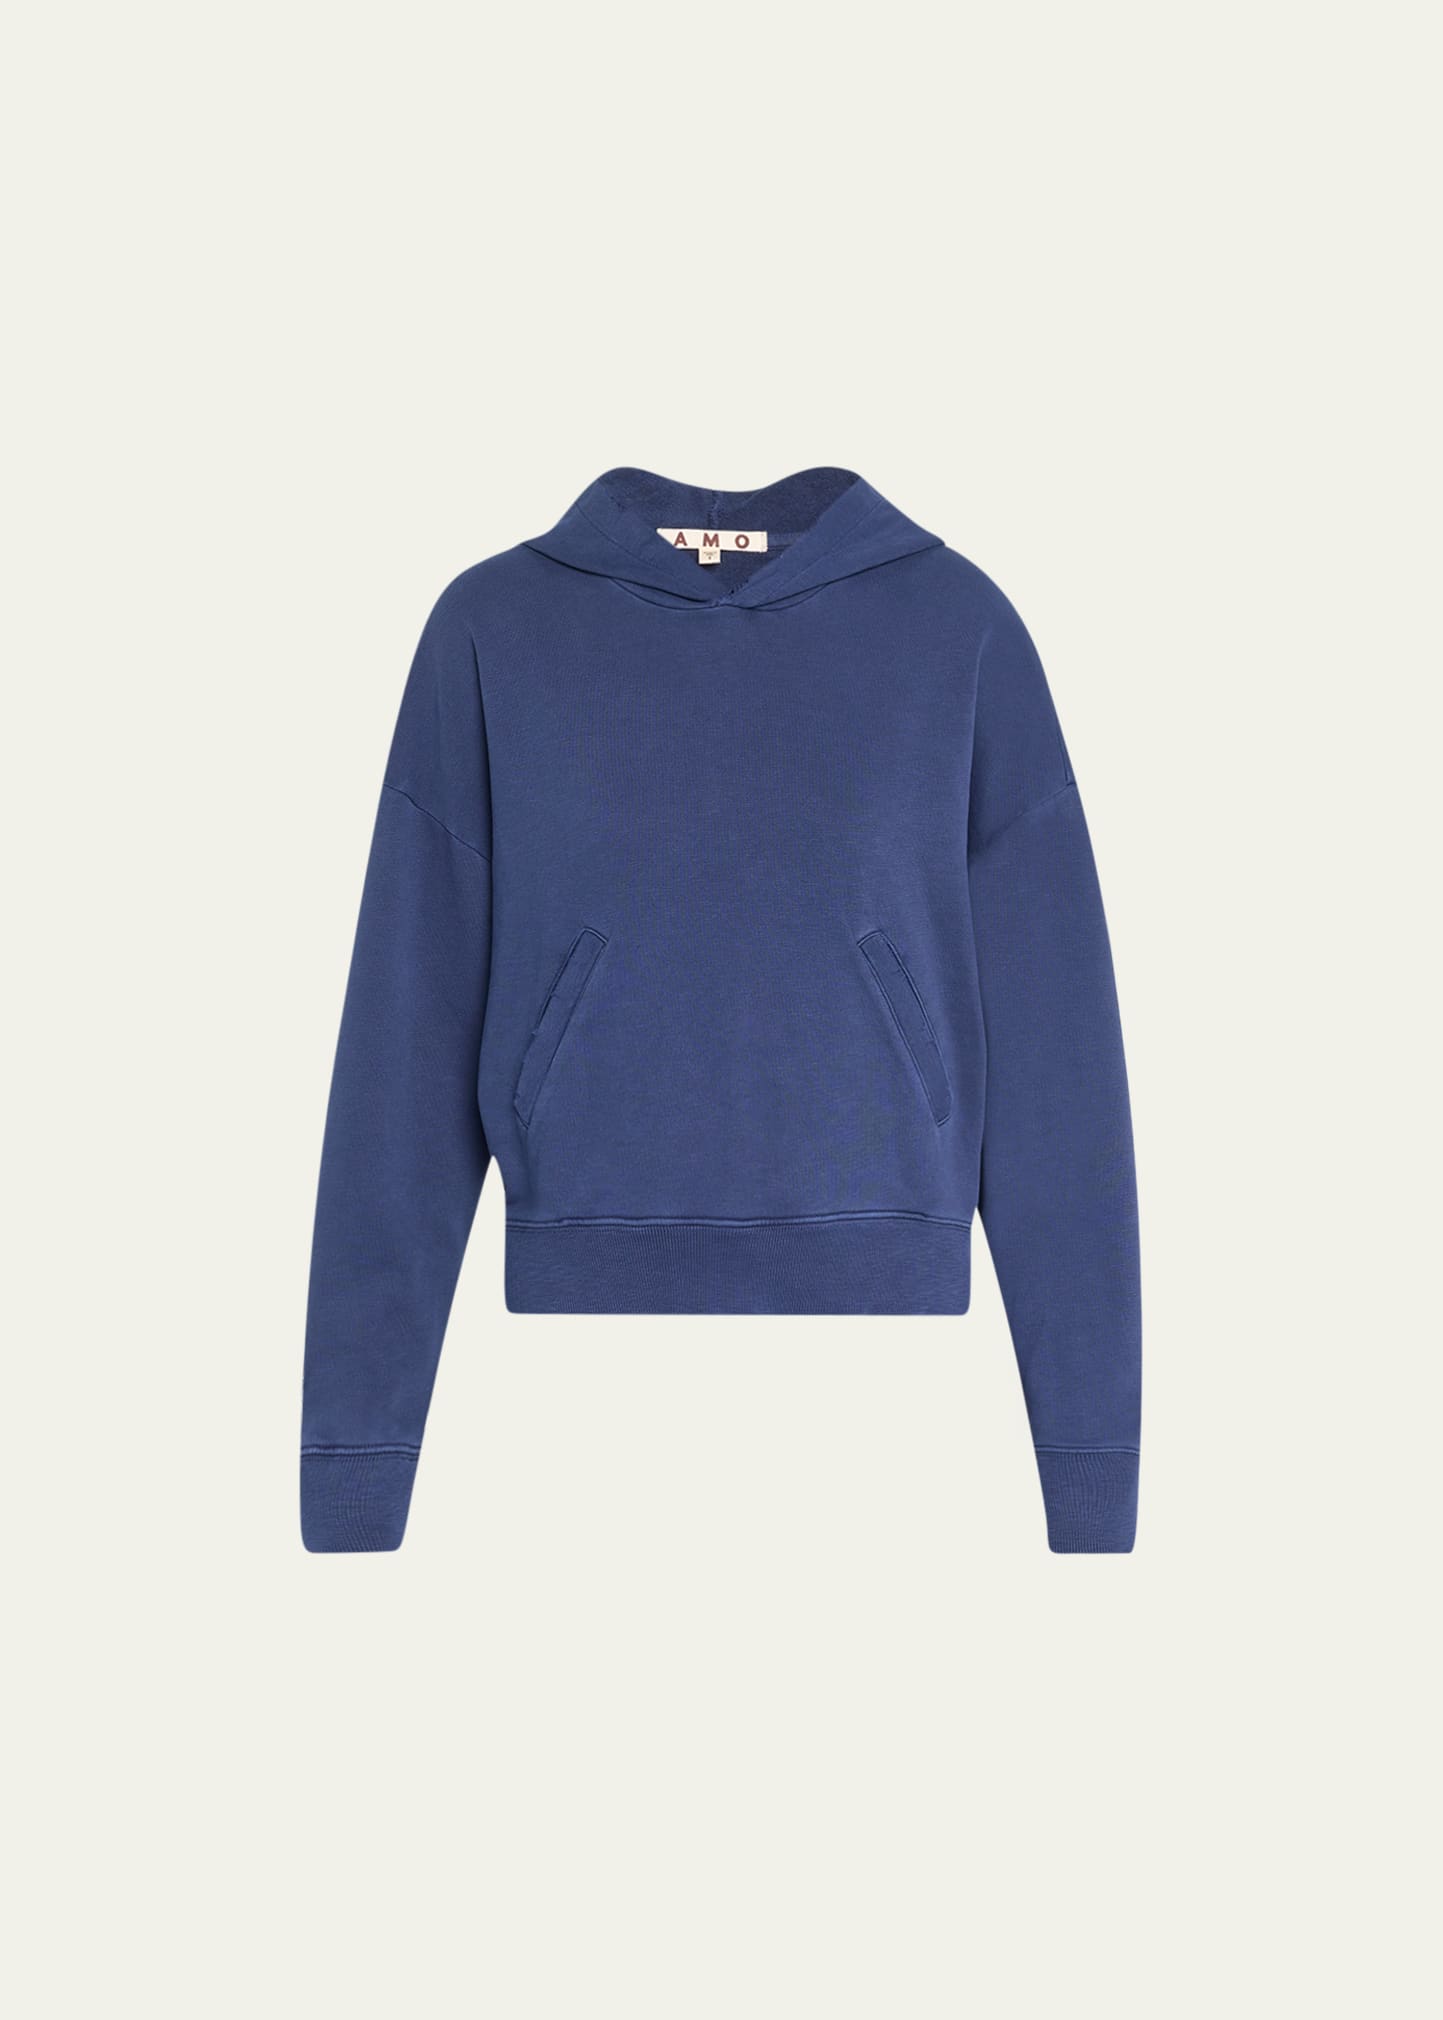 Amo Denim French-terry Curved Hoodie In Neptune